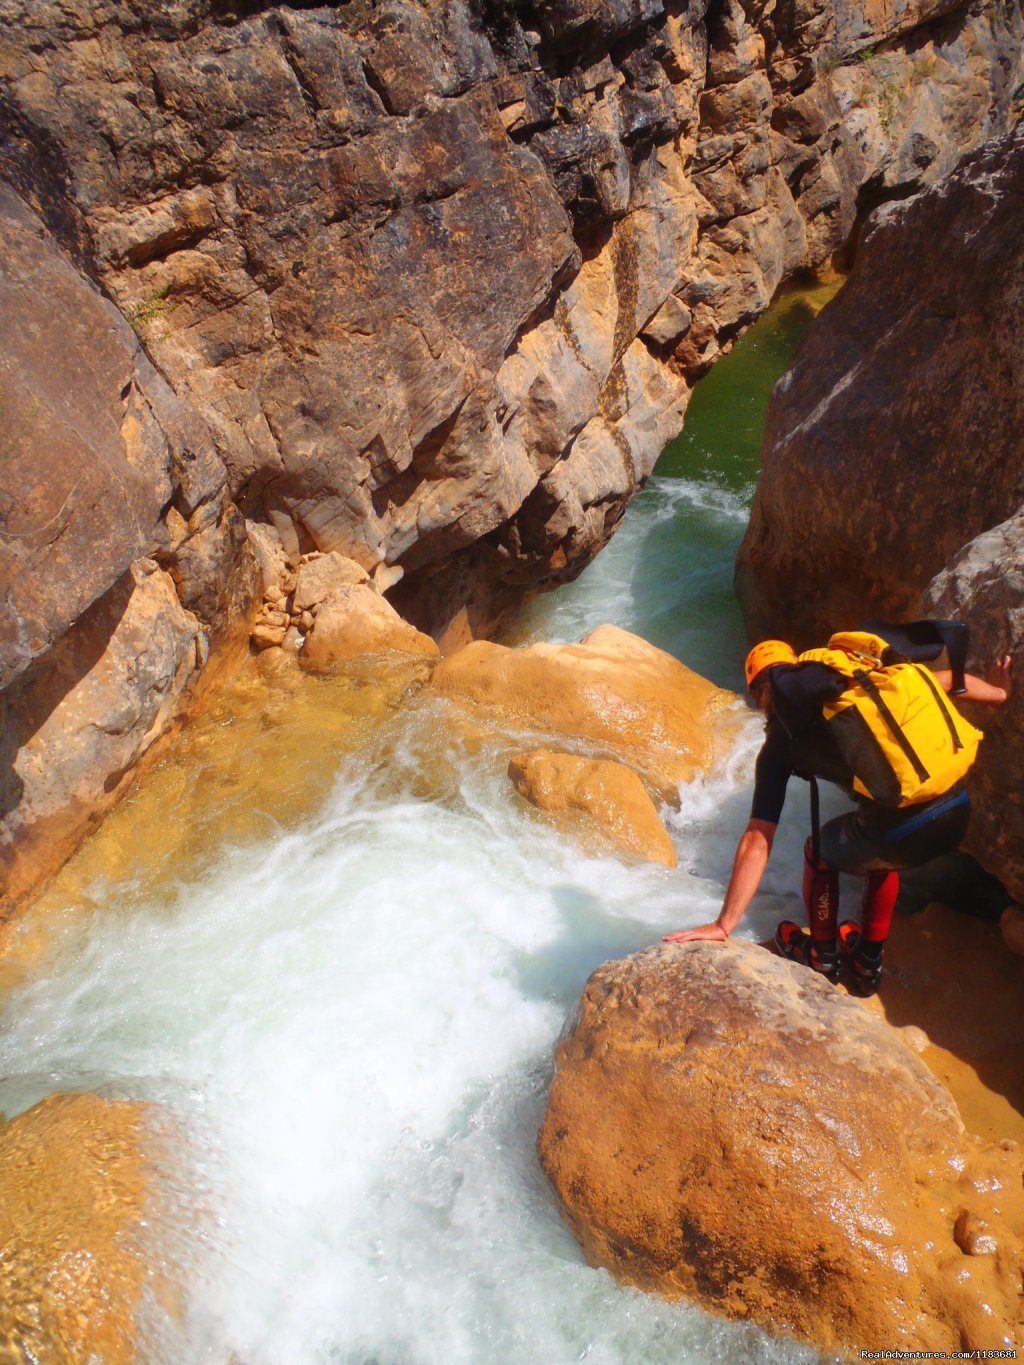 Water dancing with rock in the canyon of Sierra de GUara | Canyoning And Adventure In Sierra De Guara - Spain | Image #6/6 | 